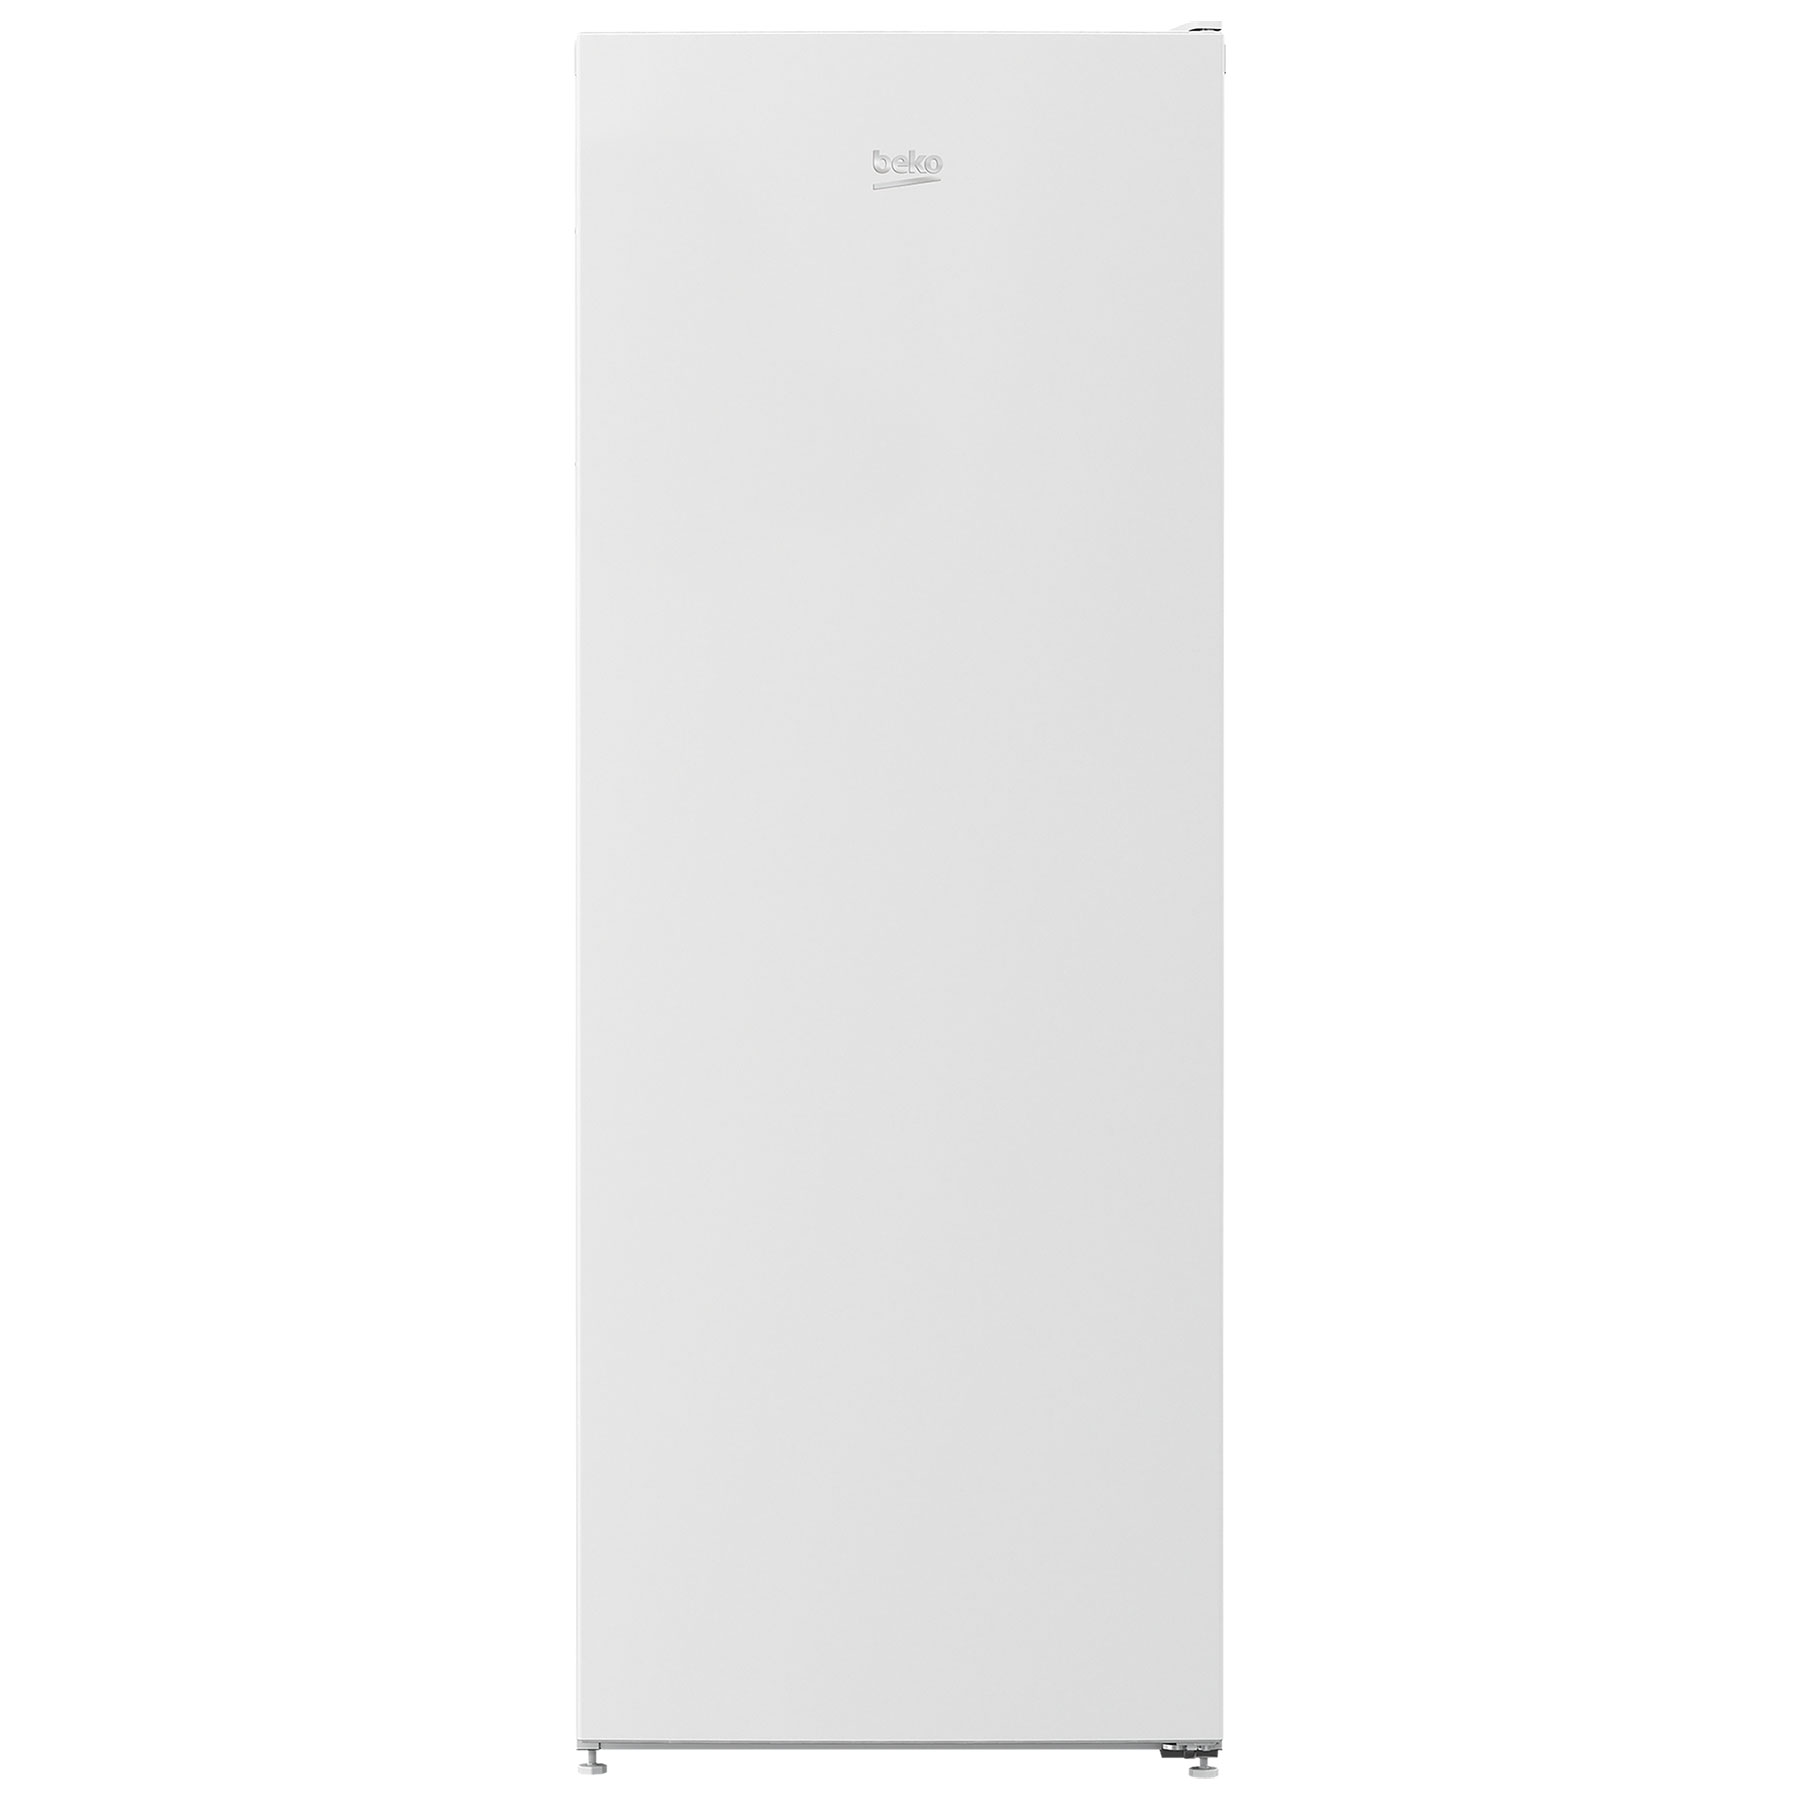 Image of Beko FFG4545W 55cm Tall Frost Free Freezer White 1 46m E Rated 177L